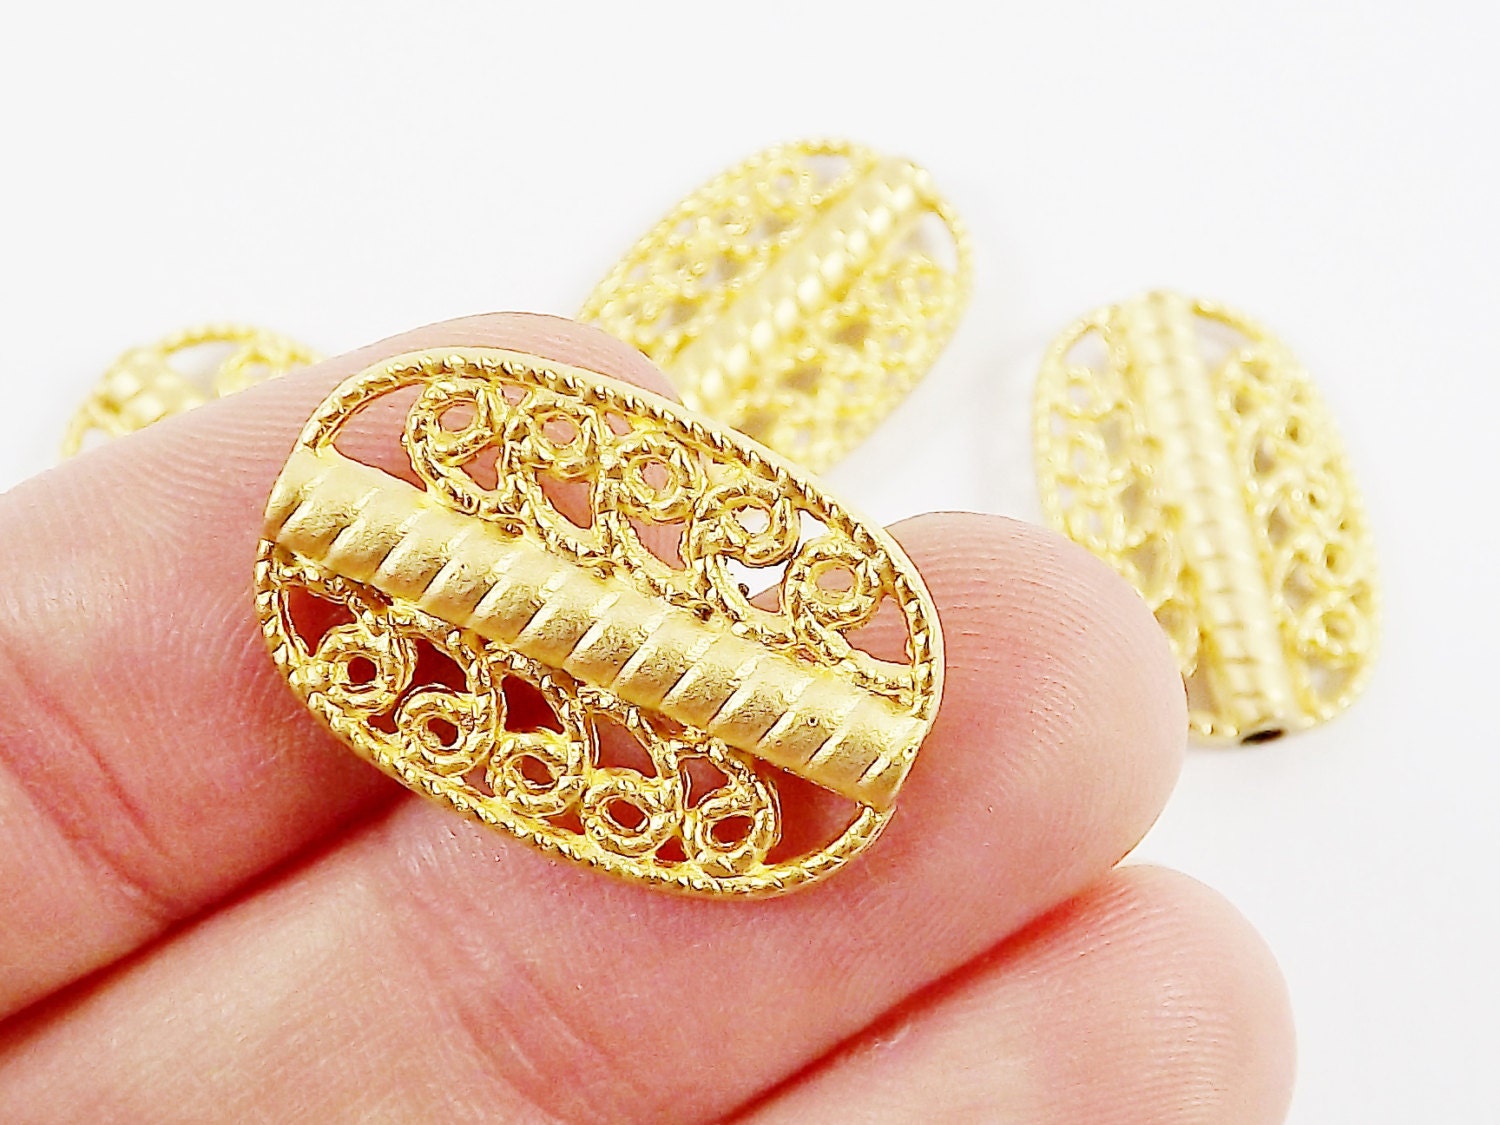 Large Rustic 22k Matte Gold Plated Oval Filigree Beads Spacers - 4 PCs